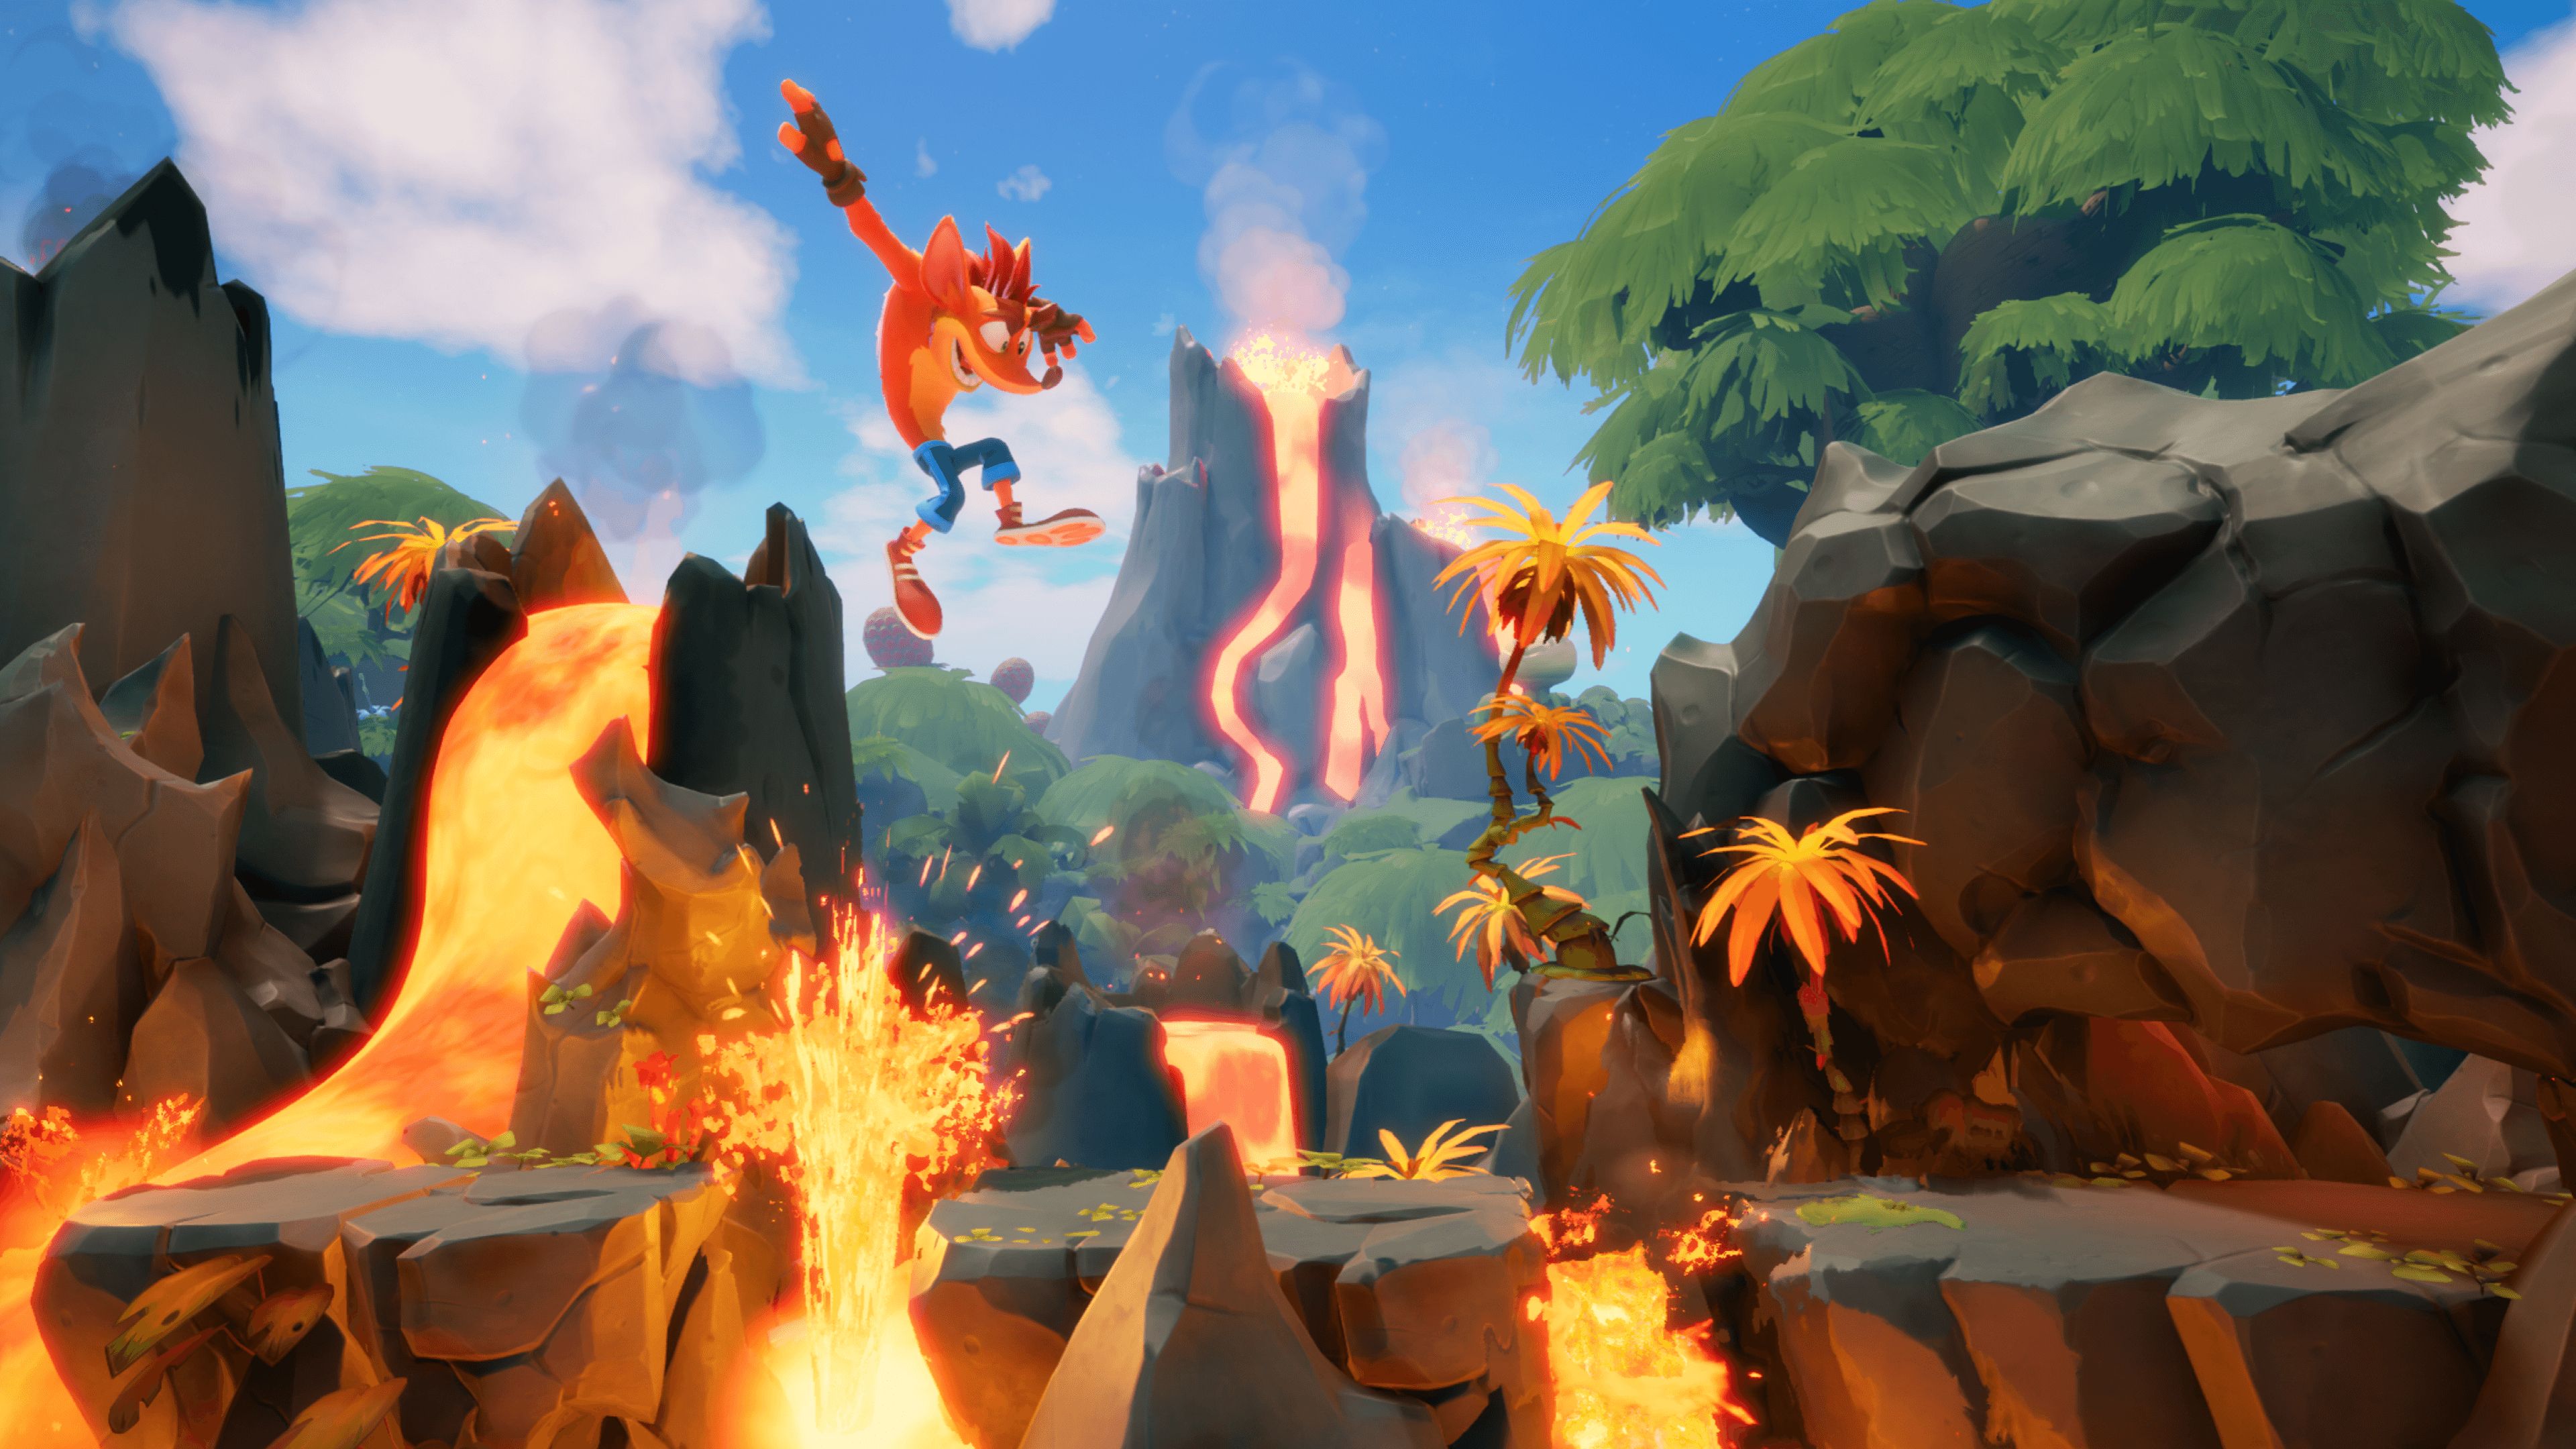 Crash Bandicoot 4 Game It's About Time Wallpaper, HD Games 4K Wallpaper, Image, Photo and Background